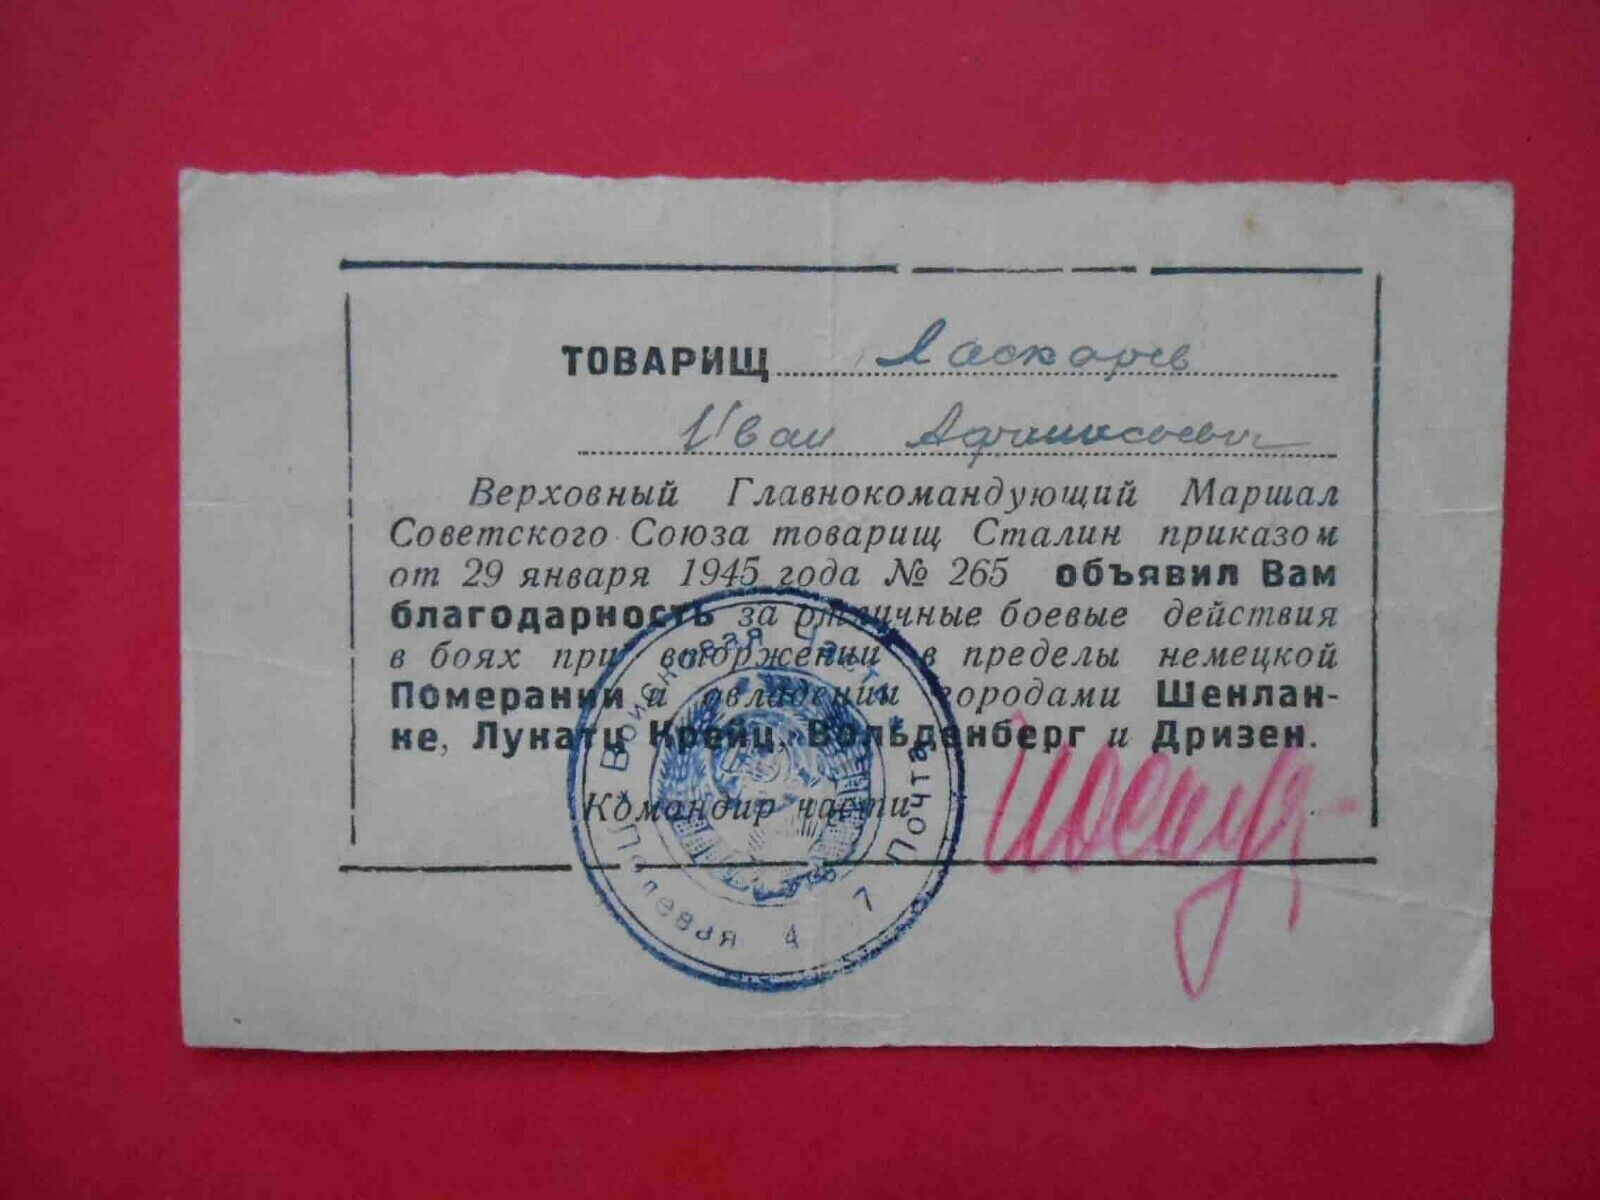 USSR 1945 Thanksgiven Document for capture Krzyż Wielkopolski Poland and other